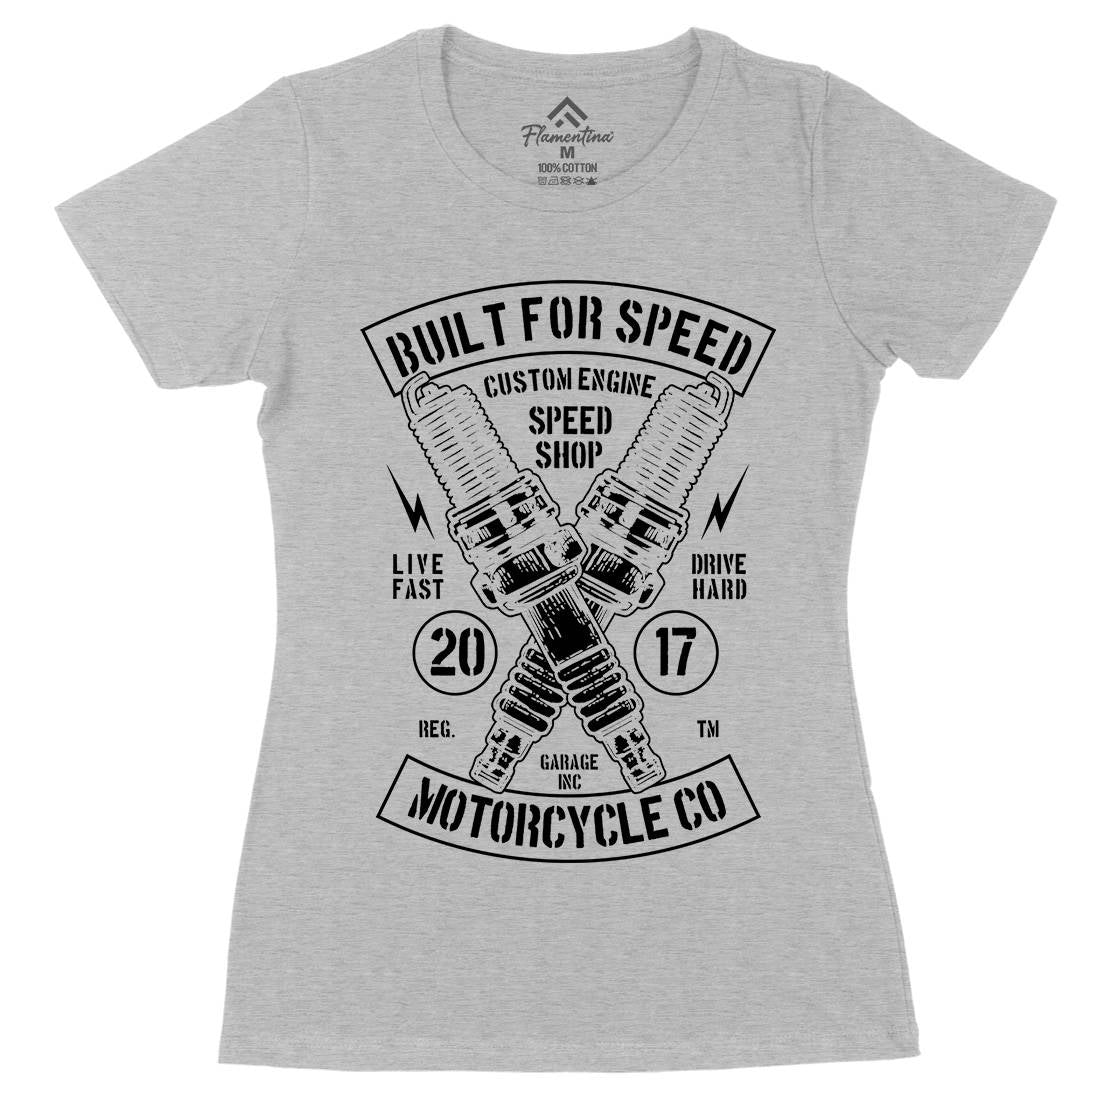 Built For Speed Womens Organic Crew Neck T-Shirt Motorcycles B188